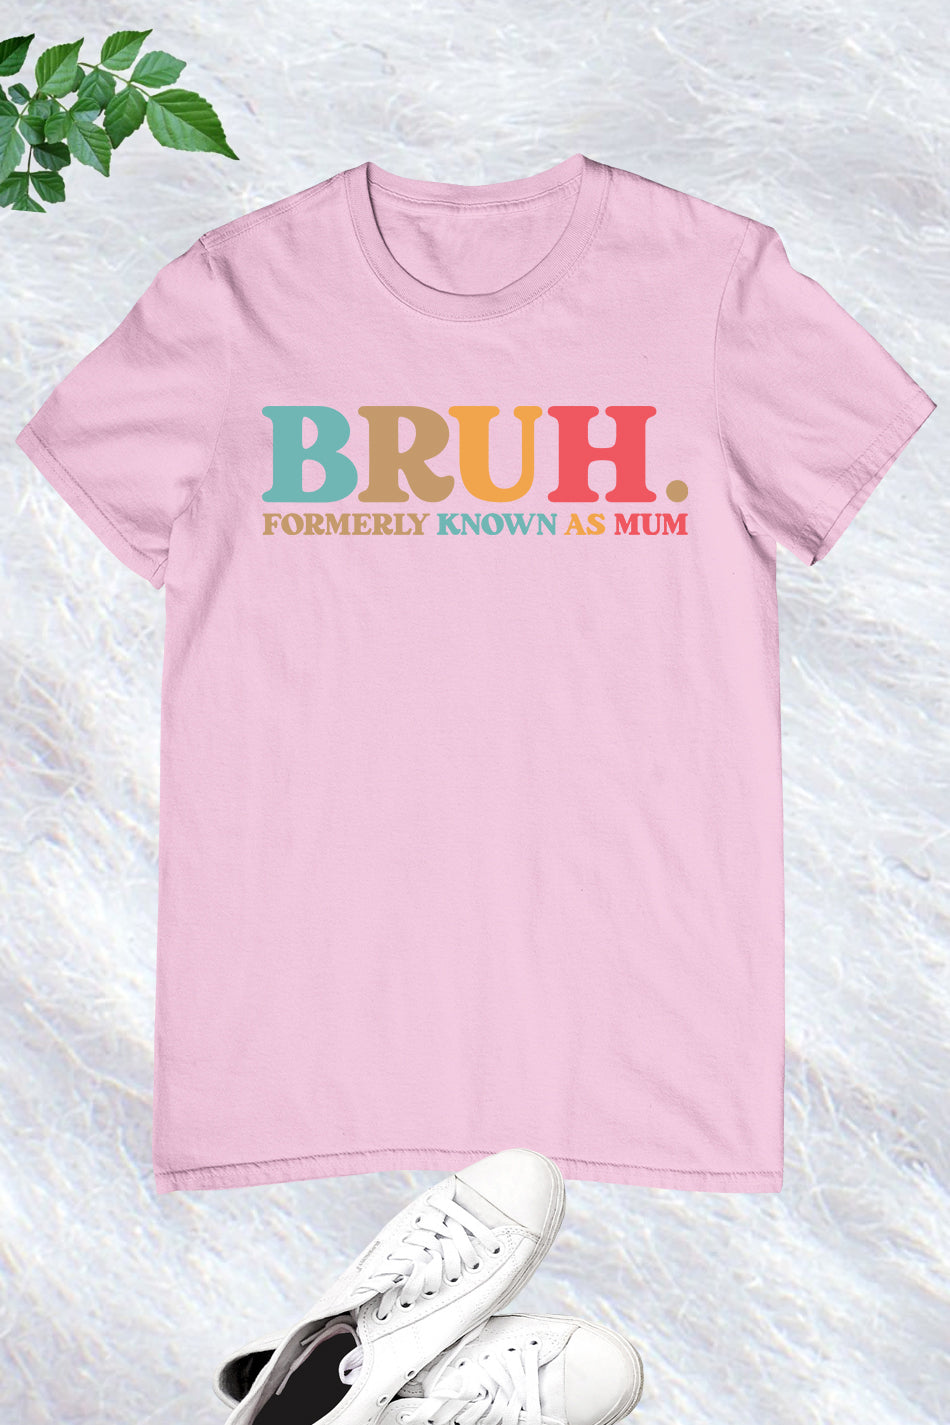 Bruh Formerly known as Mum Shirt